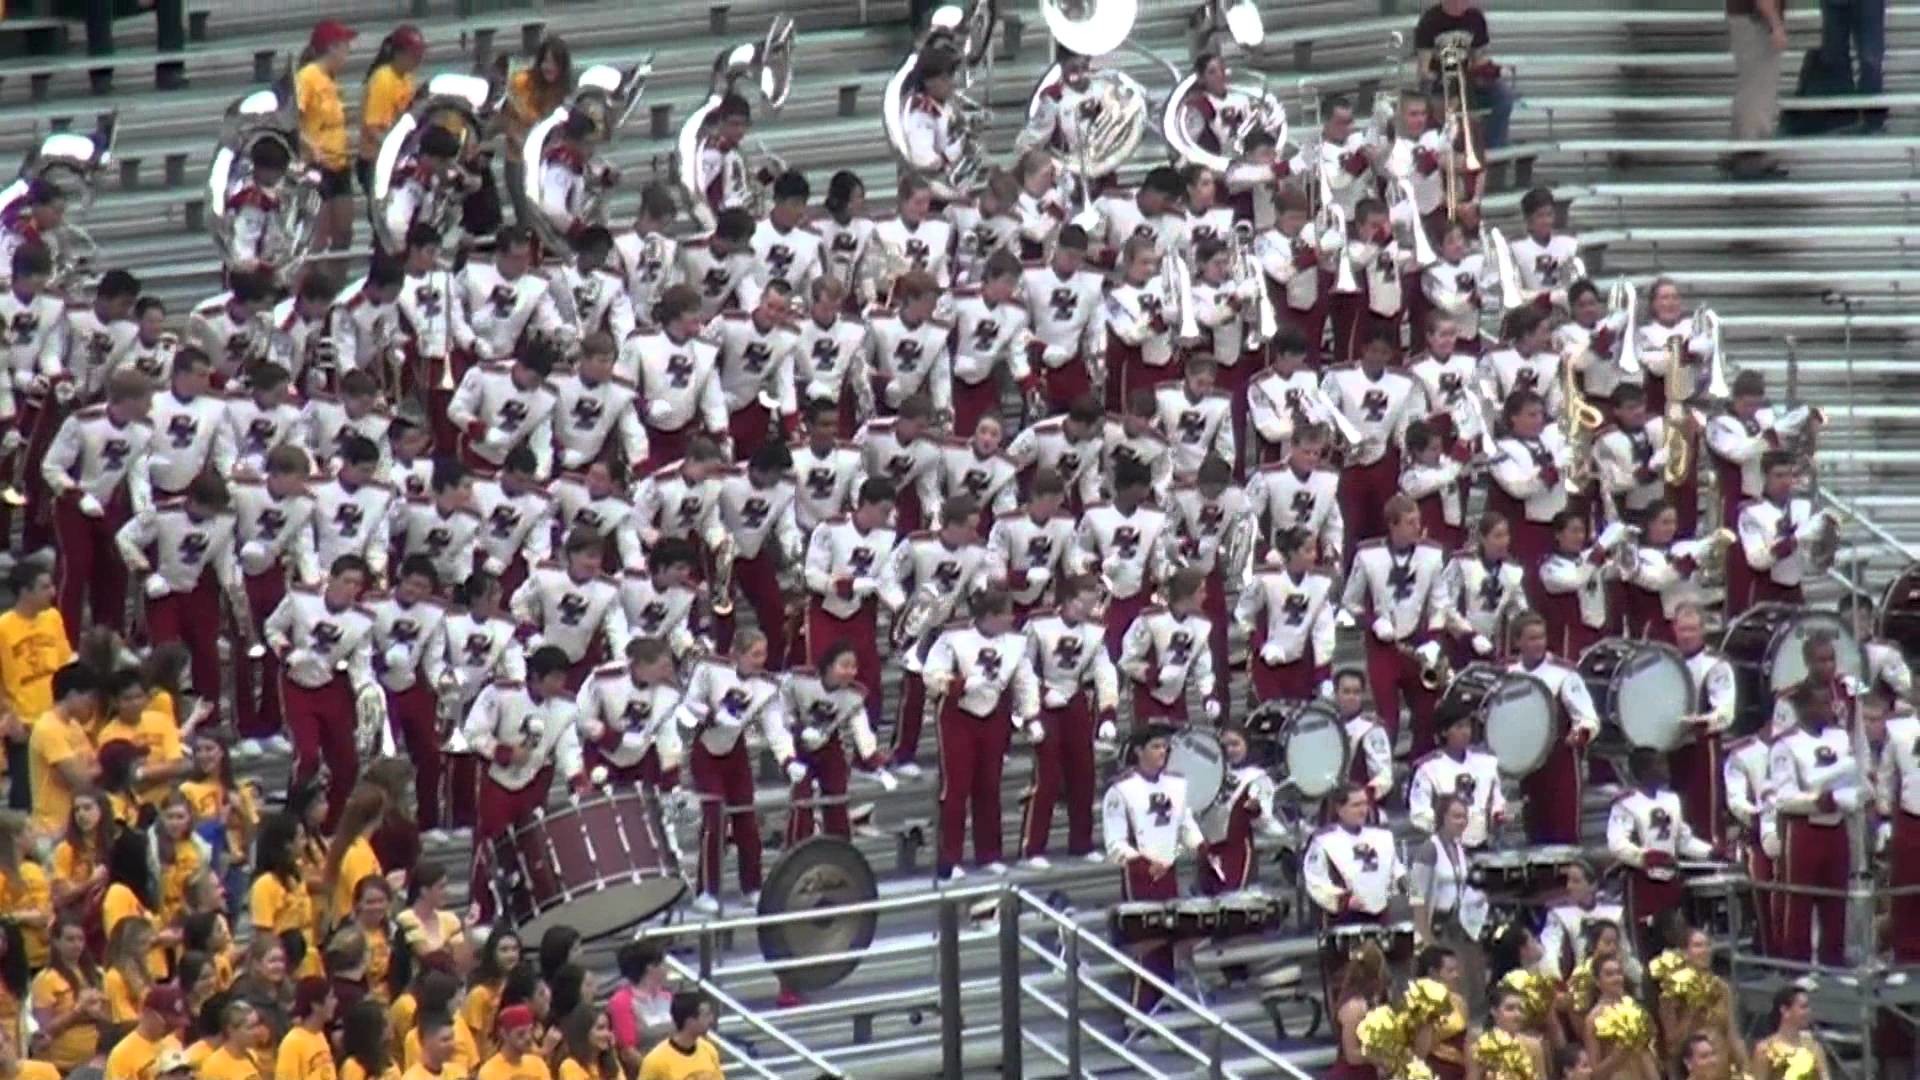 1920x1080 Boston College Marching Band Boston College Marching Band Booty Drop 2011  YouTube